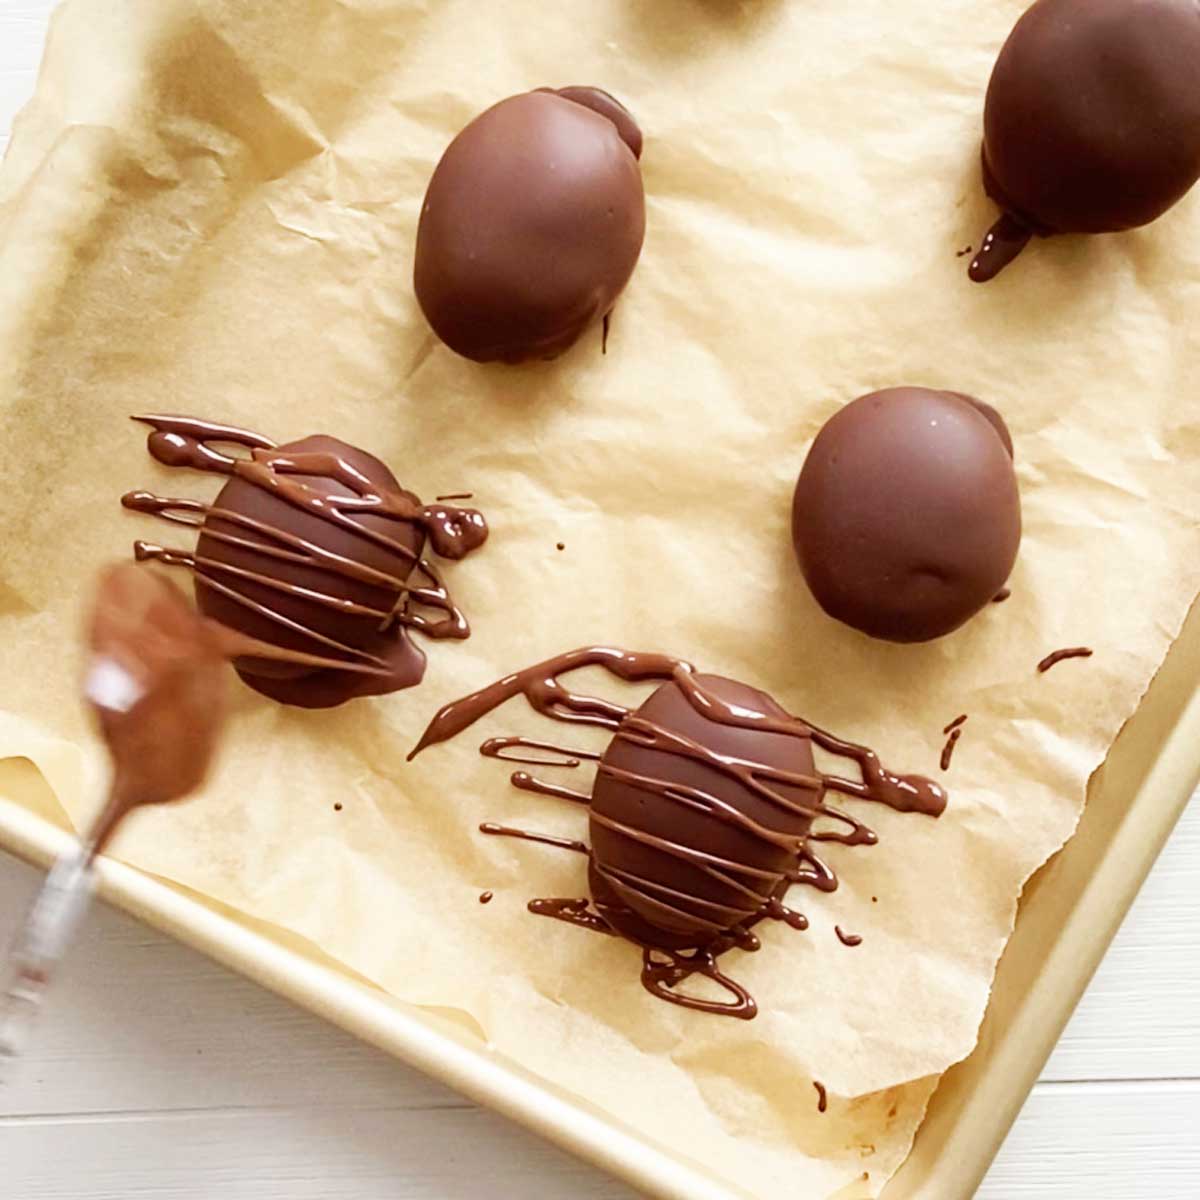 Easy & Delicious Banana Chocolate Easter Eggs Recipe with PB Fit - Only 3 Ingredients! - Banana Chocolate Easter Eggs